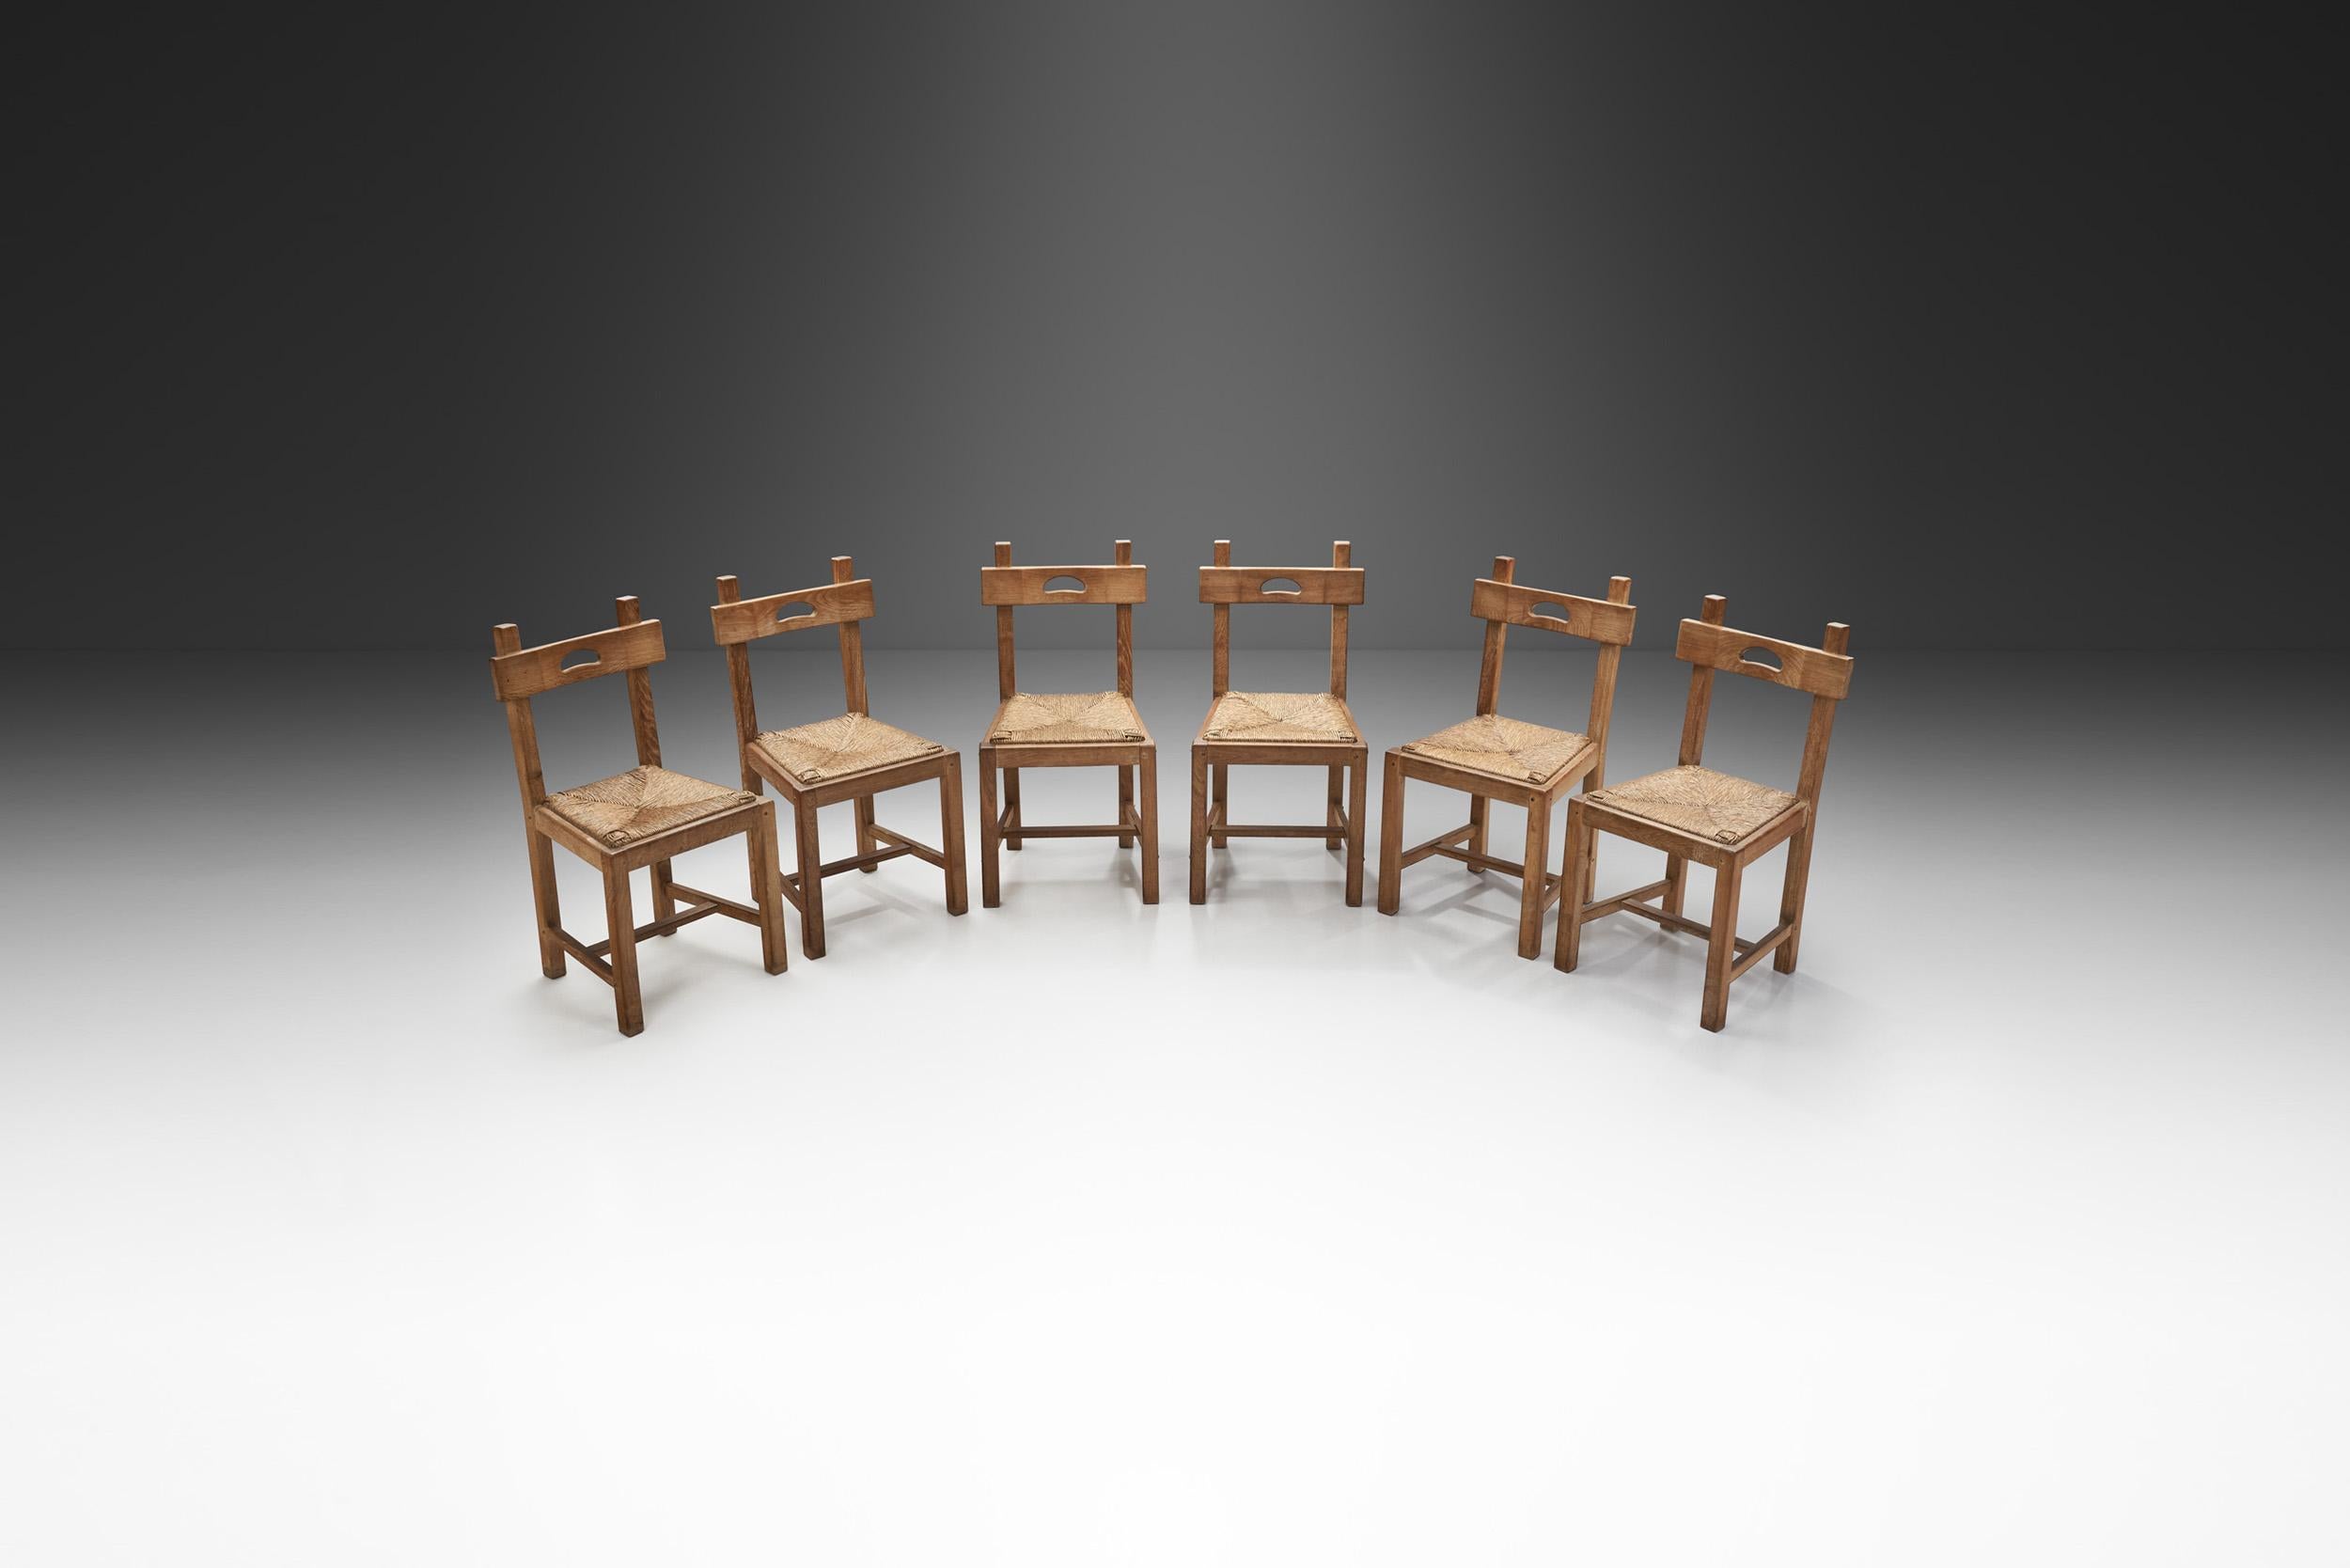 European Rush and Wood Rustic Dining Chair Set, Europe, ca 1950s For Sale